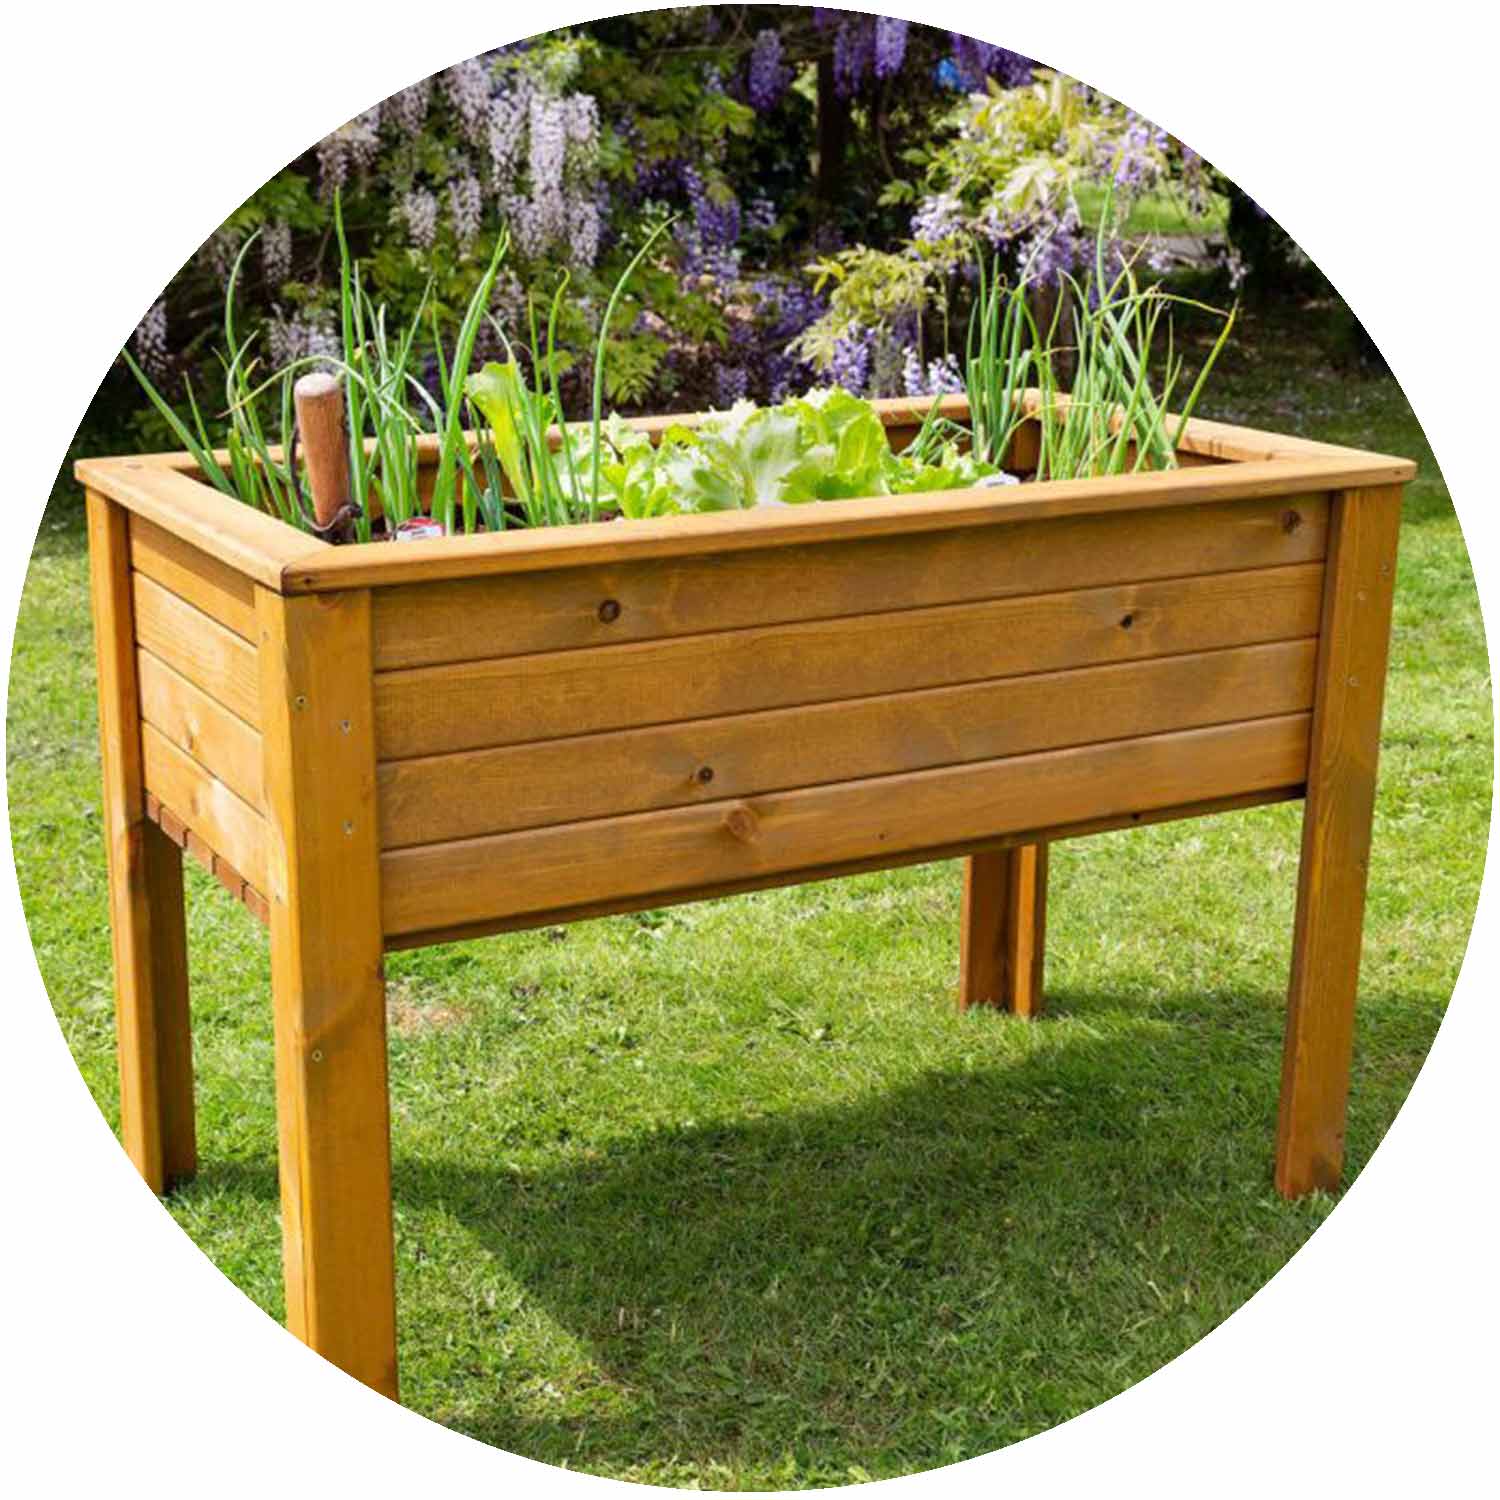 'Grow Your Own' Vegetable Planter